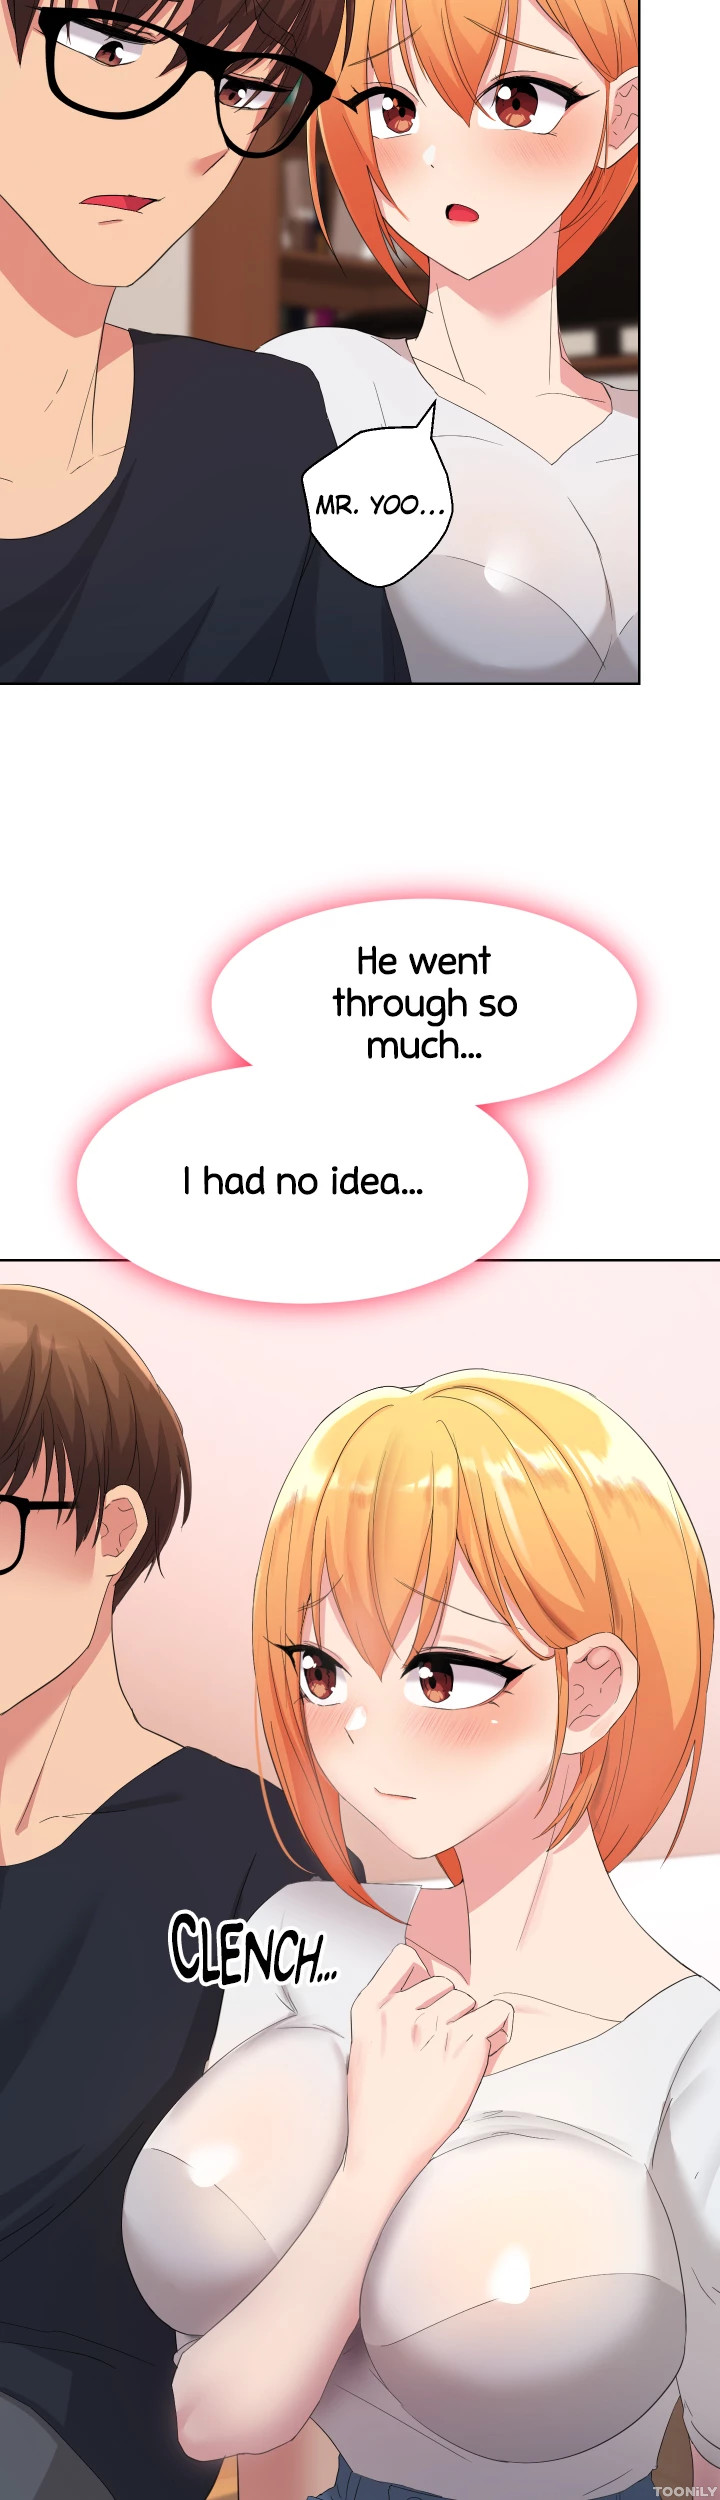 Girls I Used to Teach - Chapter 2 Page 58